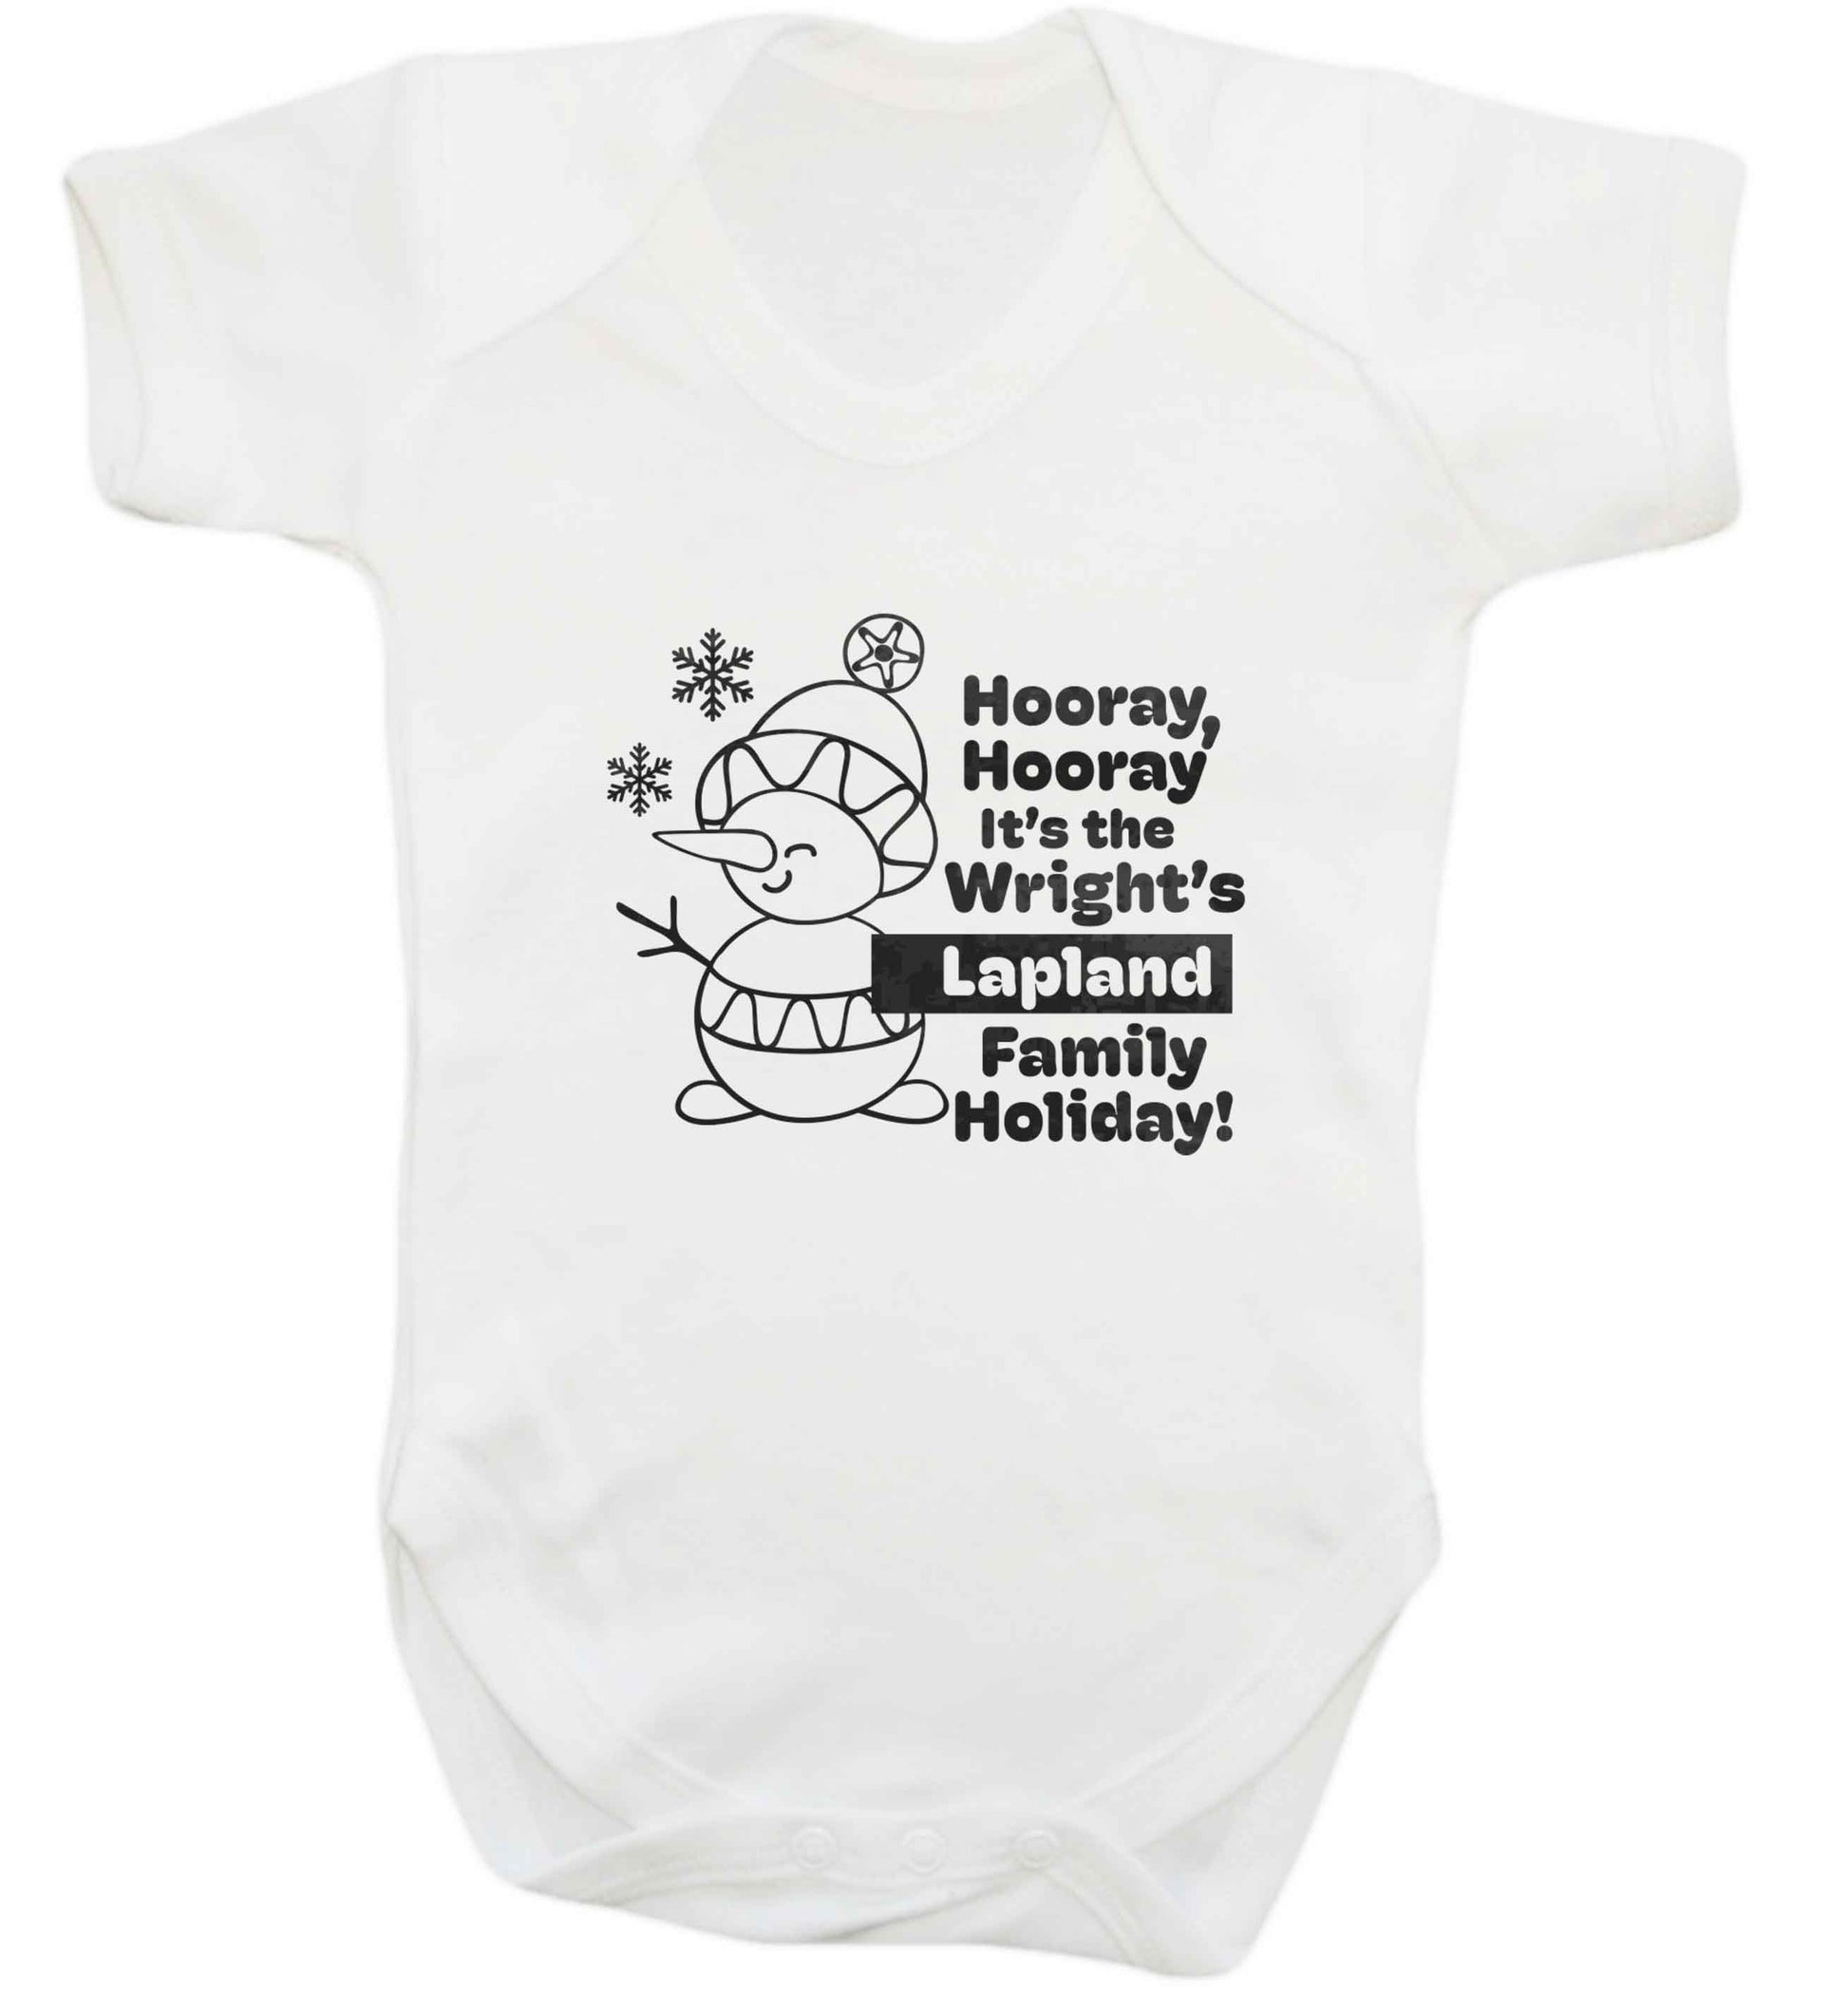 Hooray it's the personalised Lapland holiday! baby vest white 18-24 months